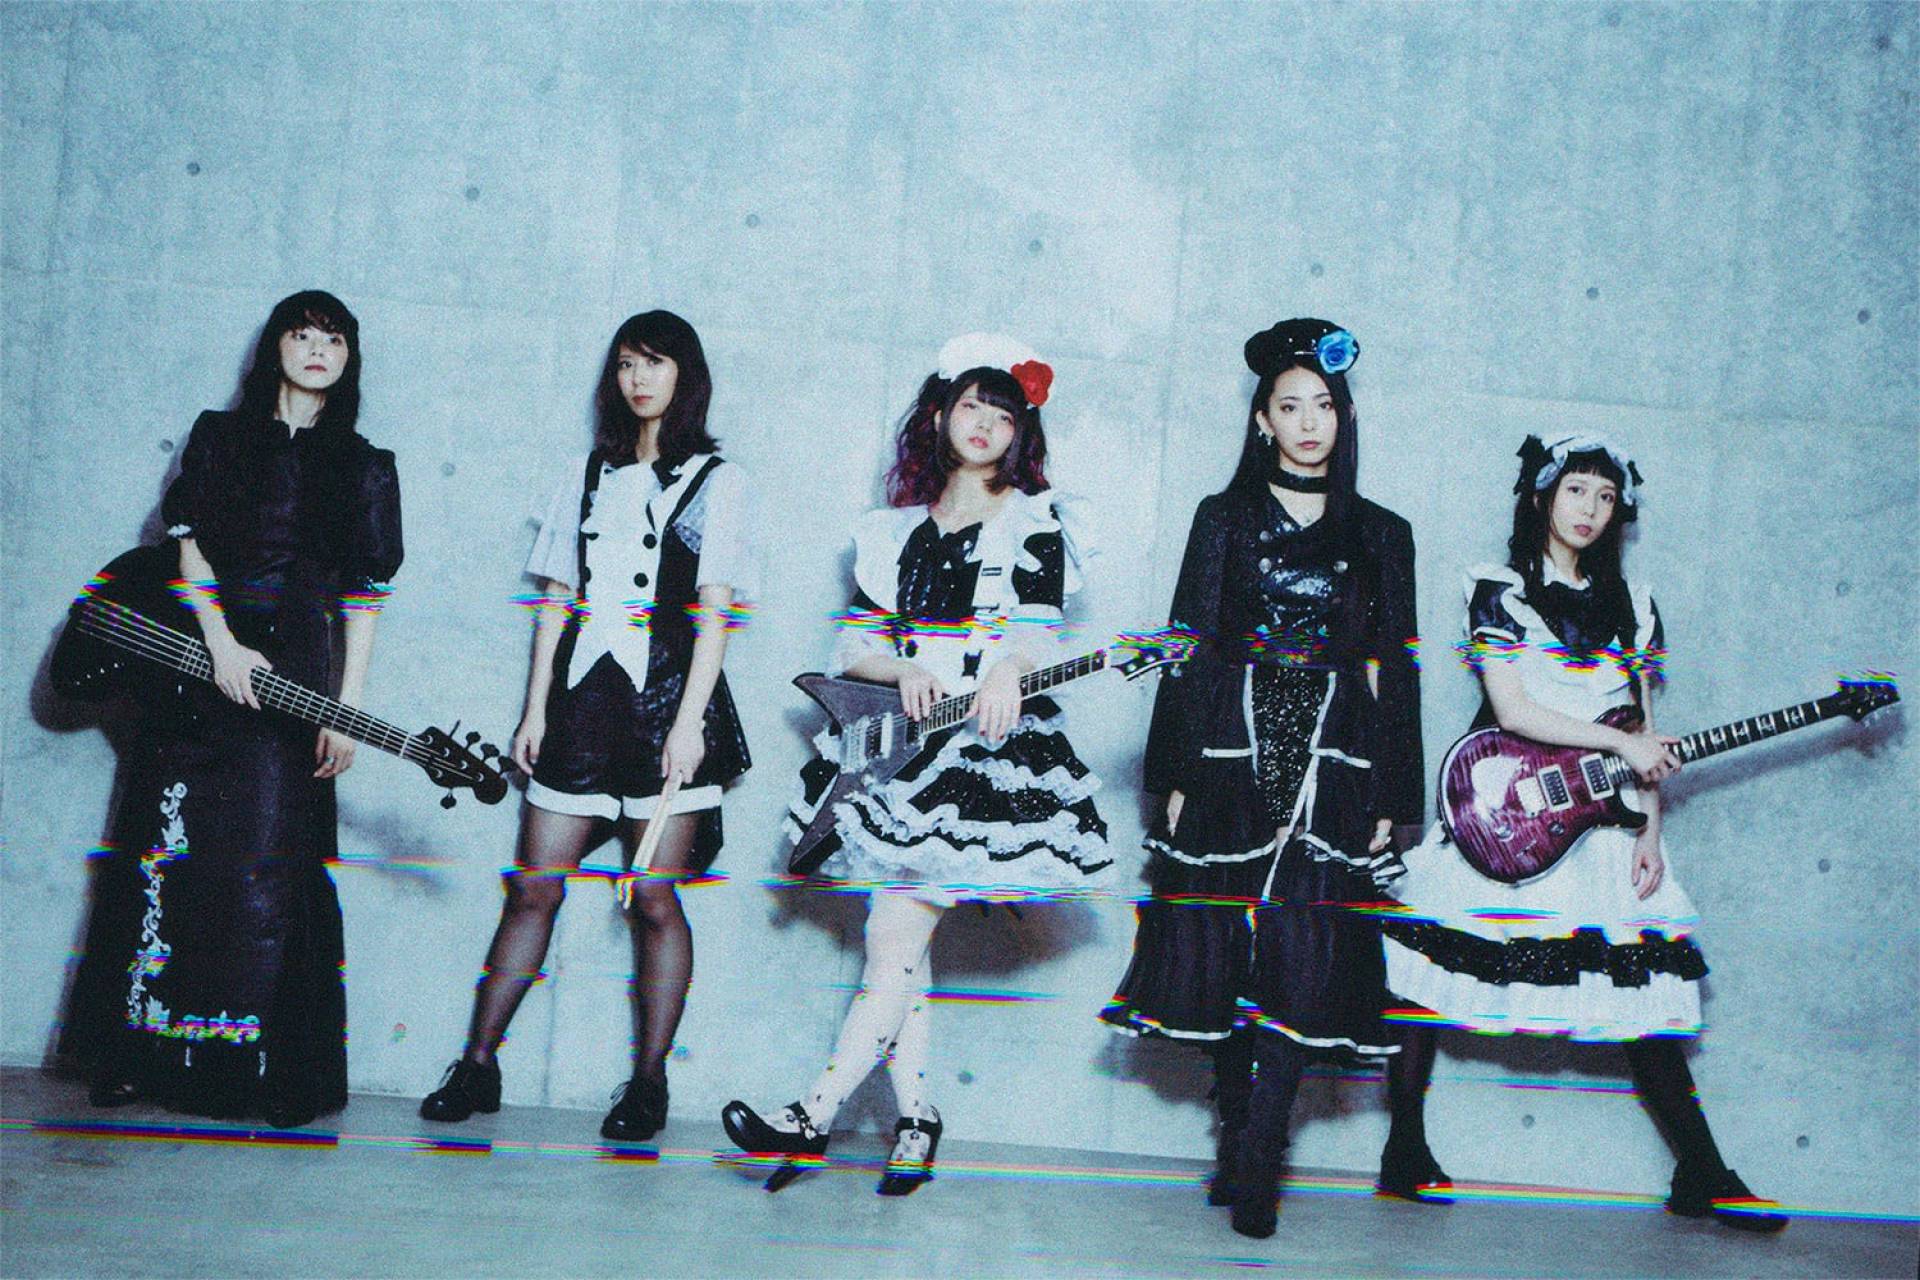 Hard Rock Band Band Maid Will Release A New Live Dvd And Blu Ray On May 26th Sync Network Japan